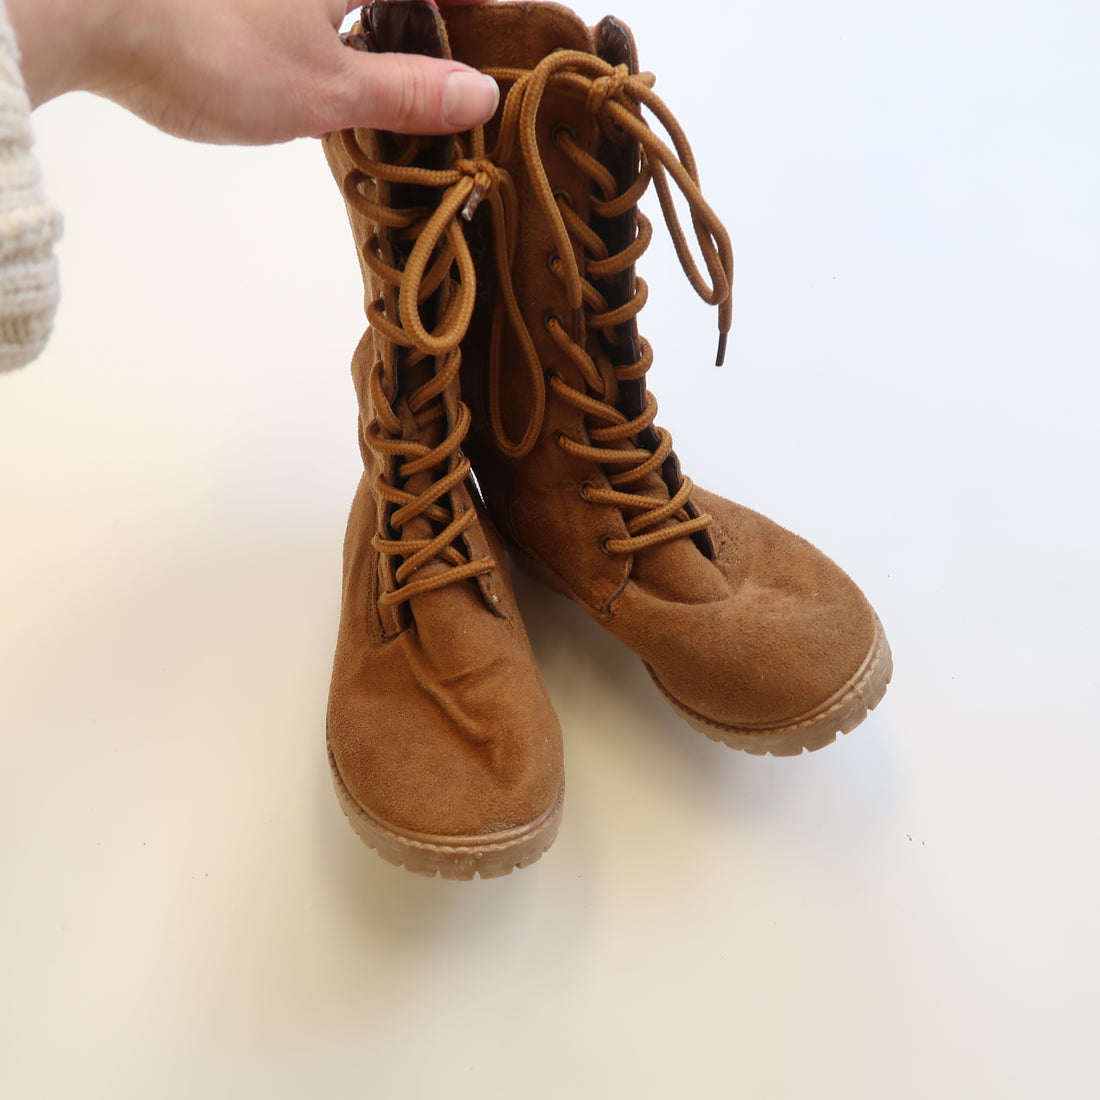 Unknown Brand - Boots (Shoes - 11)